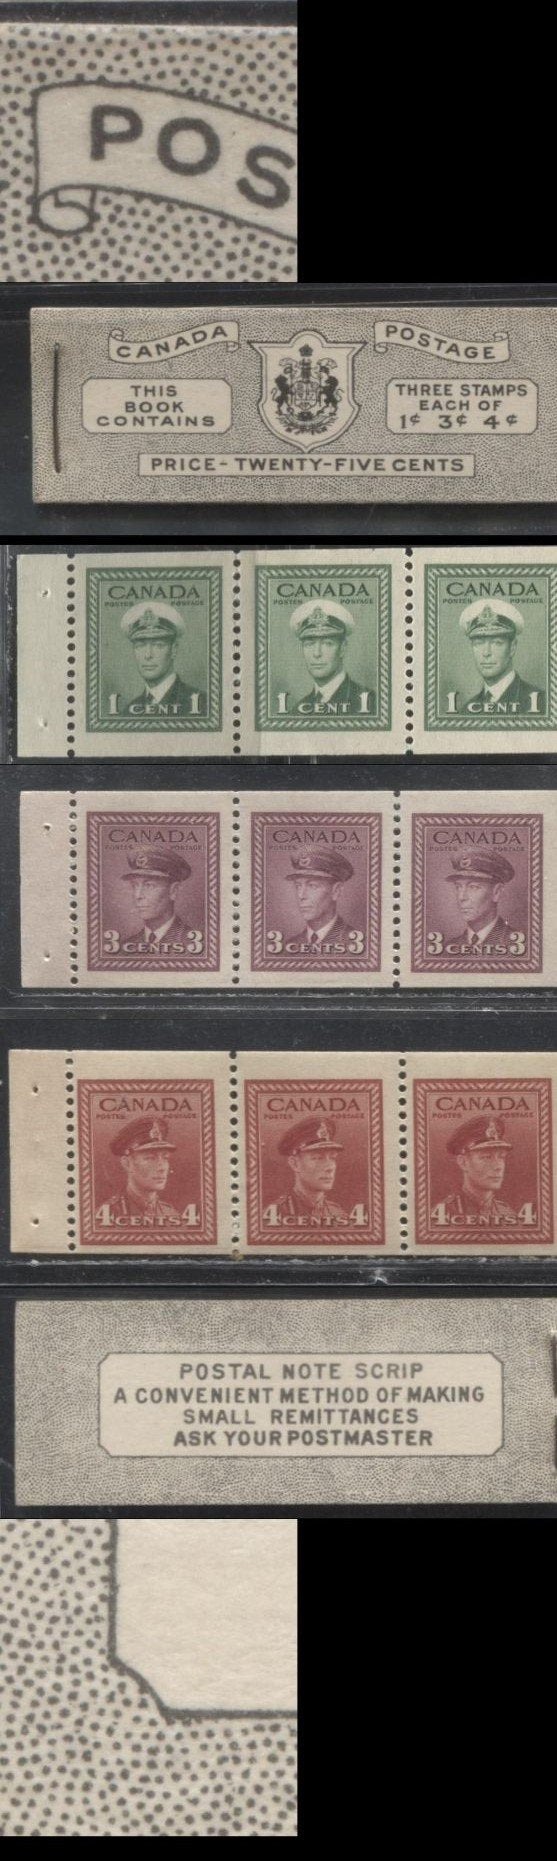 Lot 187 Canada #BK38a 1942-1949 War Issue Complete 25c, English Booklet Containing 1 Pane Each of 3 of 1c Green, 3c Rosy Plum and 4c Carmine Red, Harris Front Cover Type IVb , Back Cover Haii, 7c & 6c Rate Page